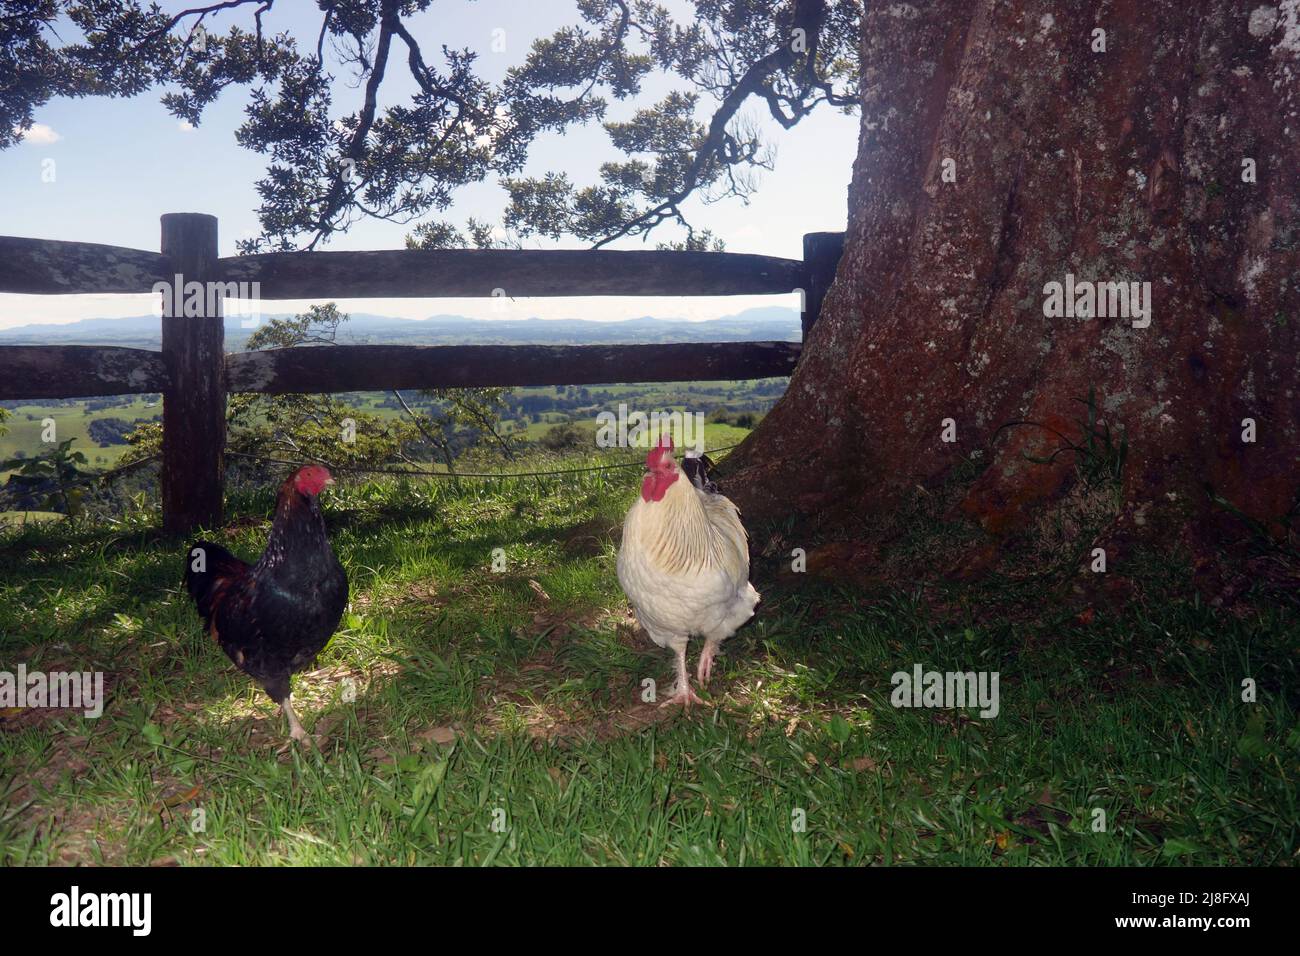 Chickens waiting to ambush picnickers at Millaa Millaa Lookout, Atherton Tablelands, Queensland, Australia Stock Photo